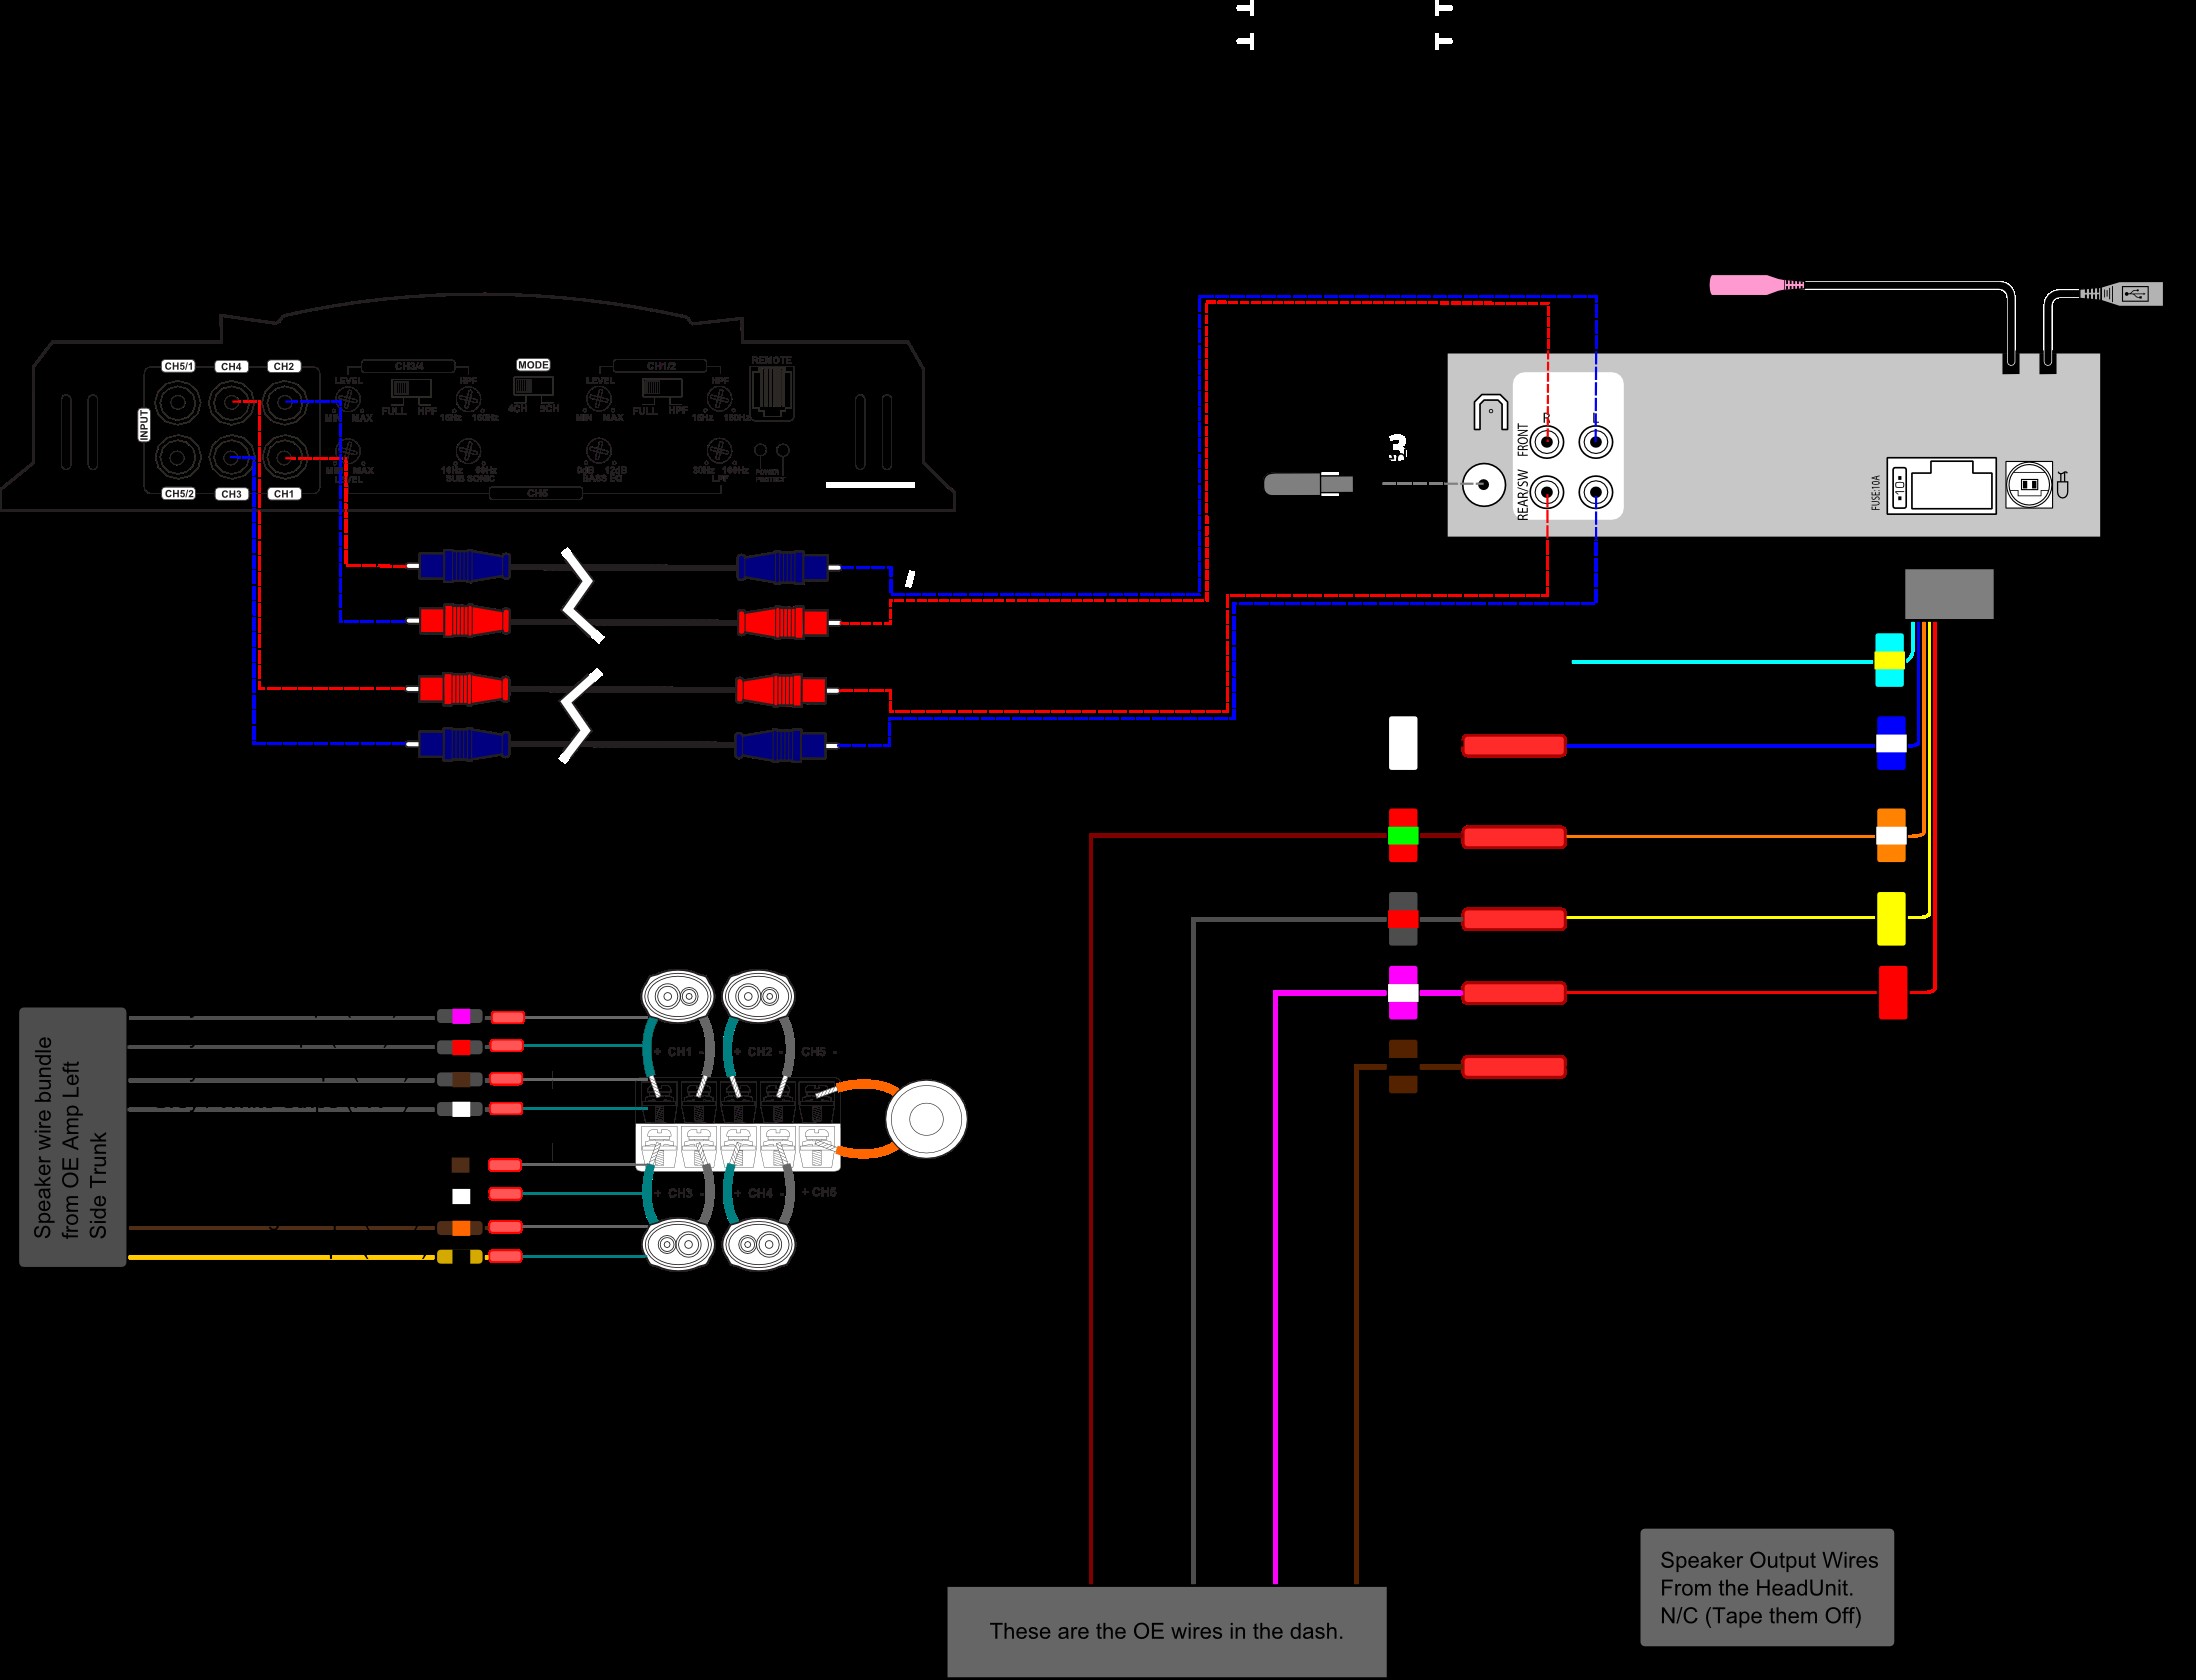 Wiring Diagram for Car Audio System Car Audio Wiring Diagrams Jvc Stereo Diagram Color On within Auto Of Wiring Diagram for Car Audio System